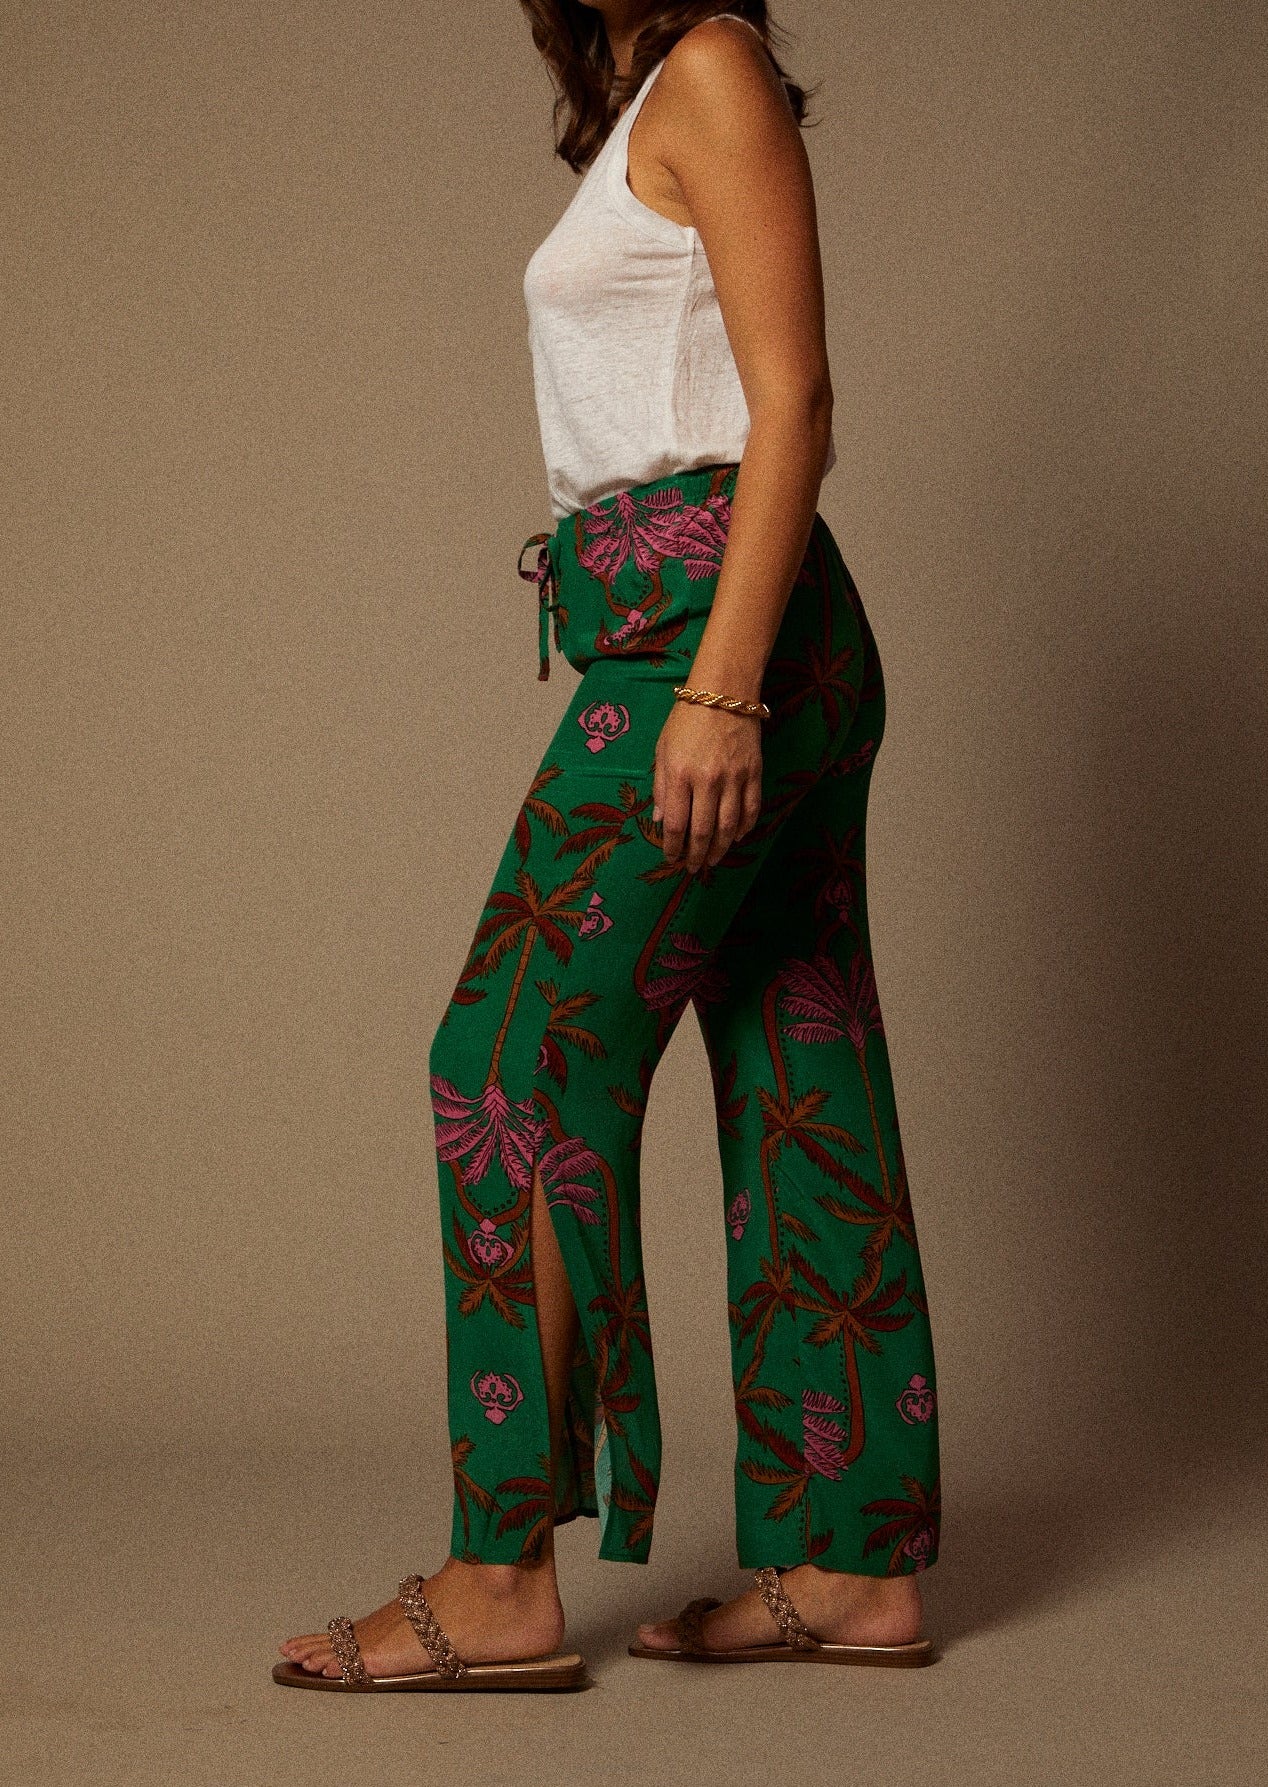 Silk Print Drawstring Wide Leg Pant with Side Slit in Palm Tree Print in Green, Brown and Pink